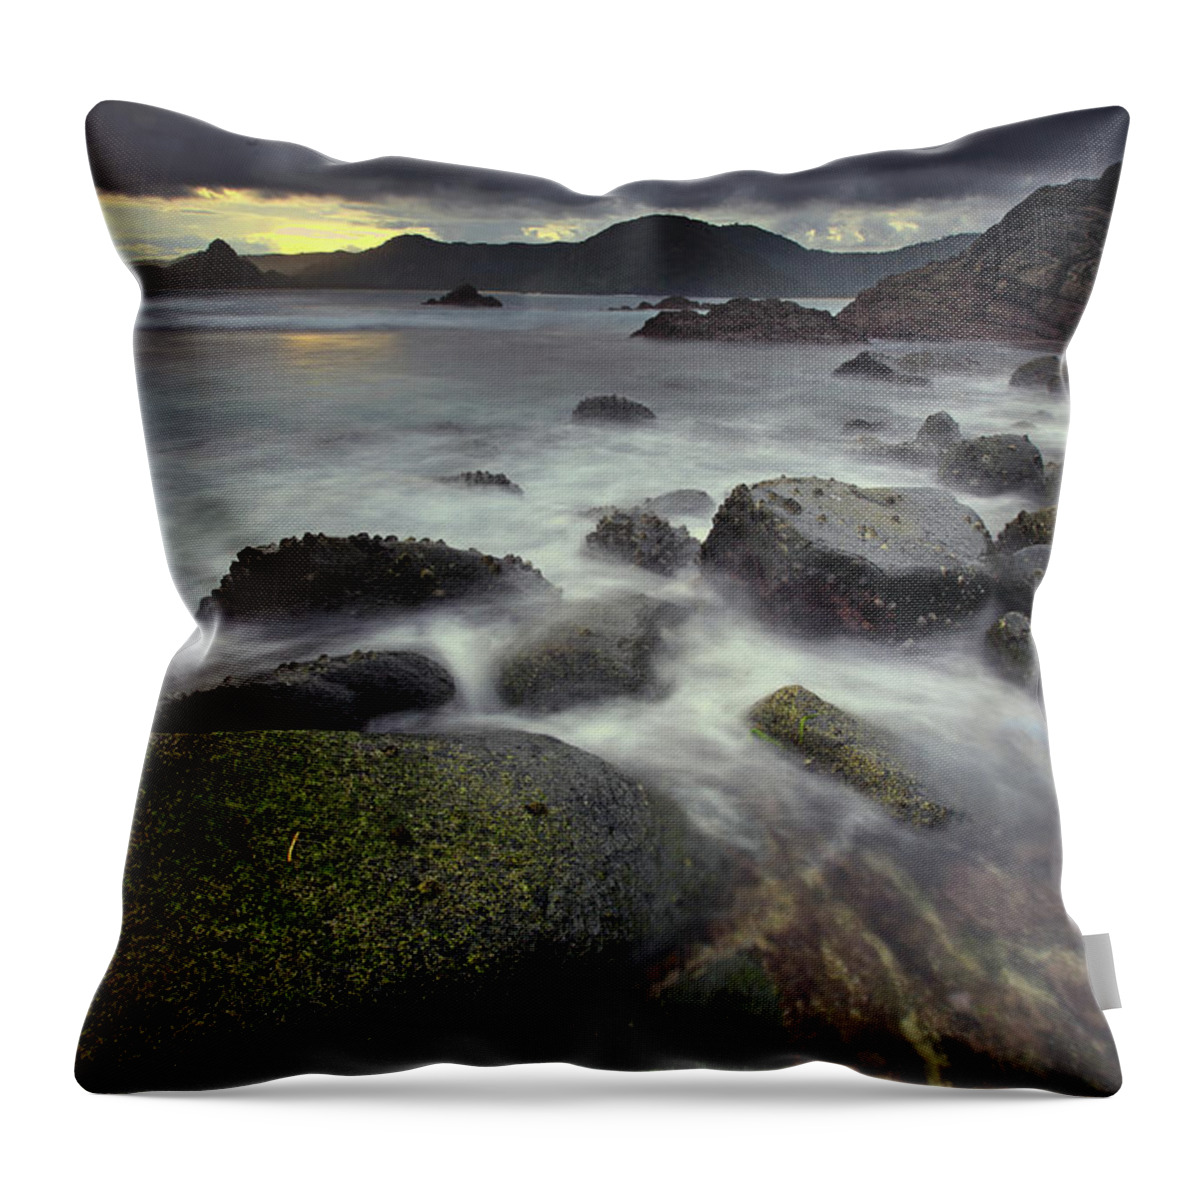 Rock Music Throw Pillow featuring the photograph Mossy Rocks In Lombok by Ali Trisno Pranoto